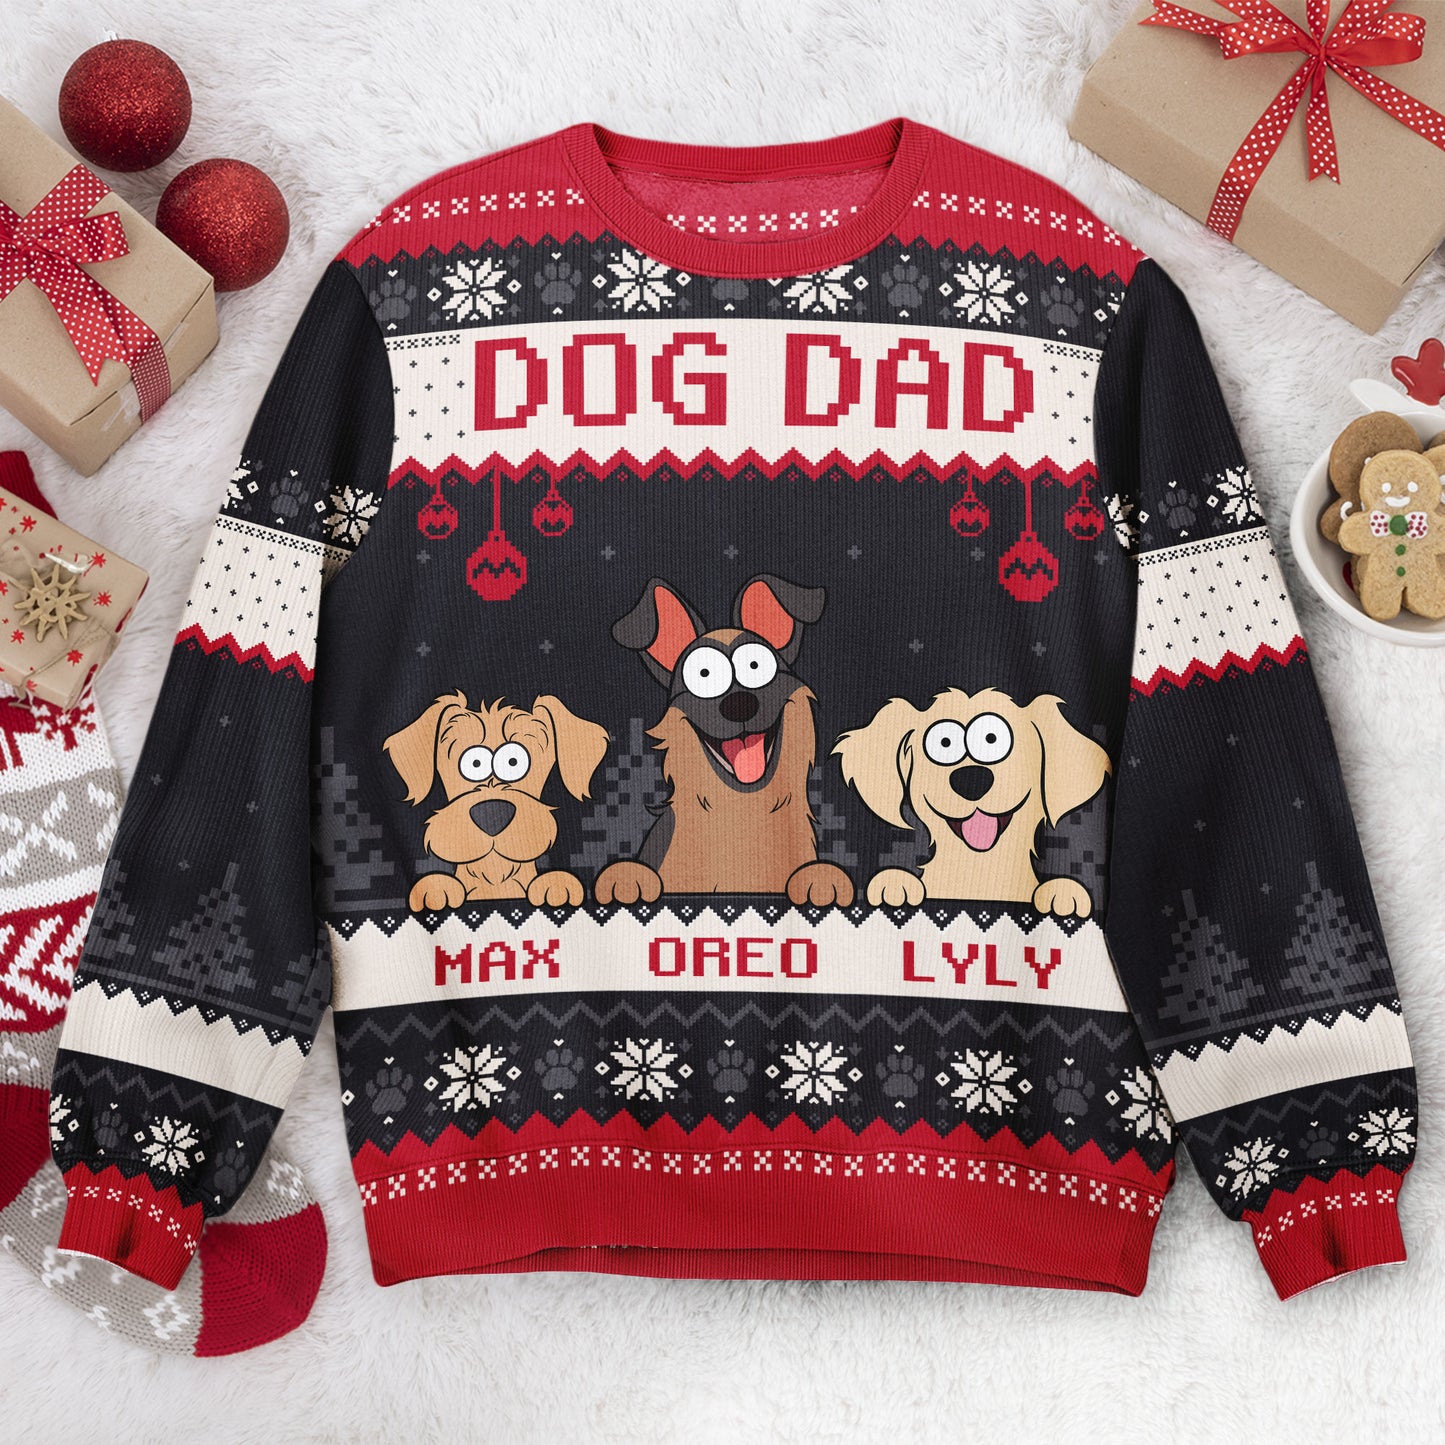 Best Dog Dad Ever - Personalized Ugly Sweater